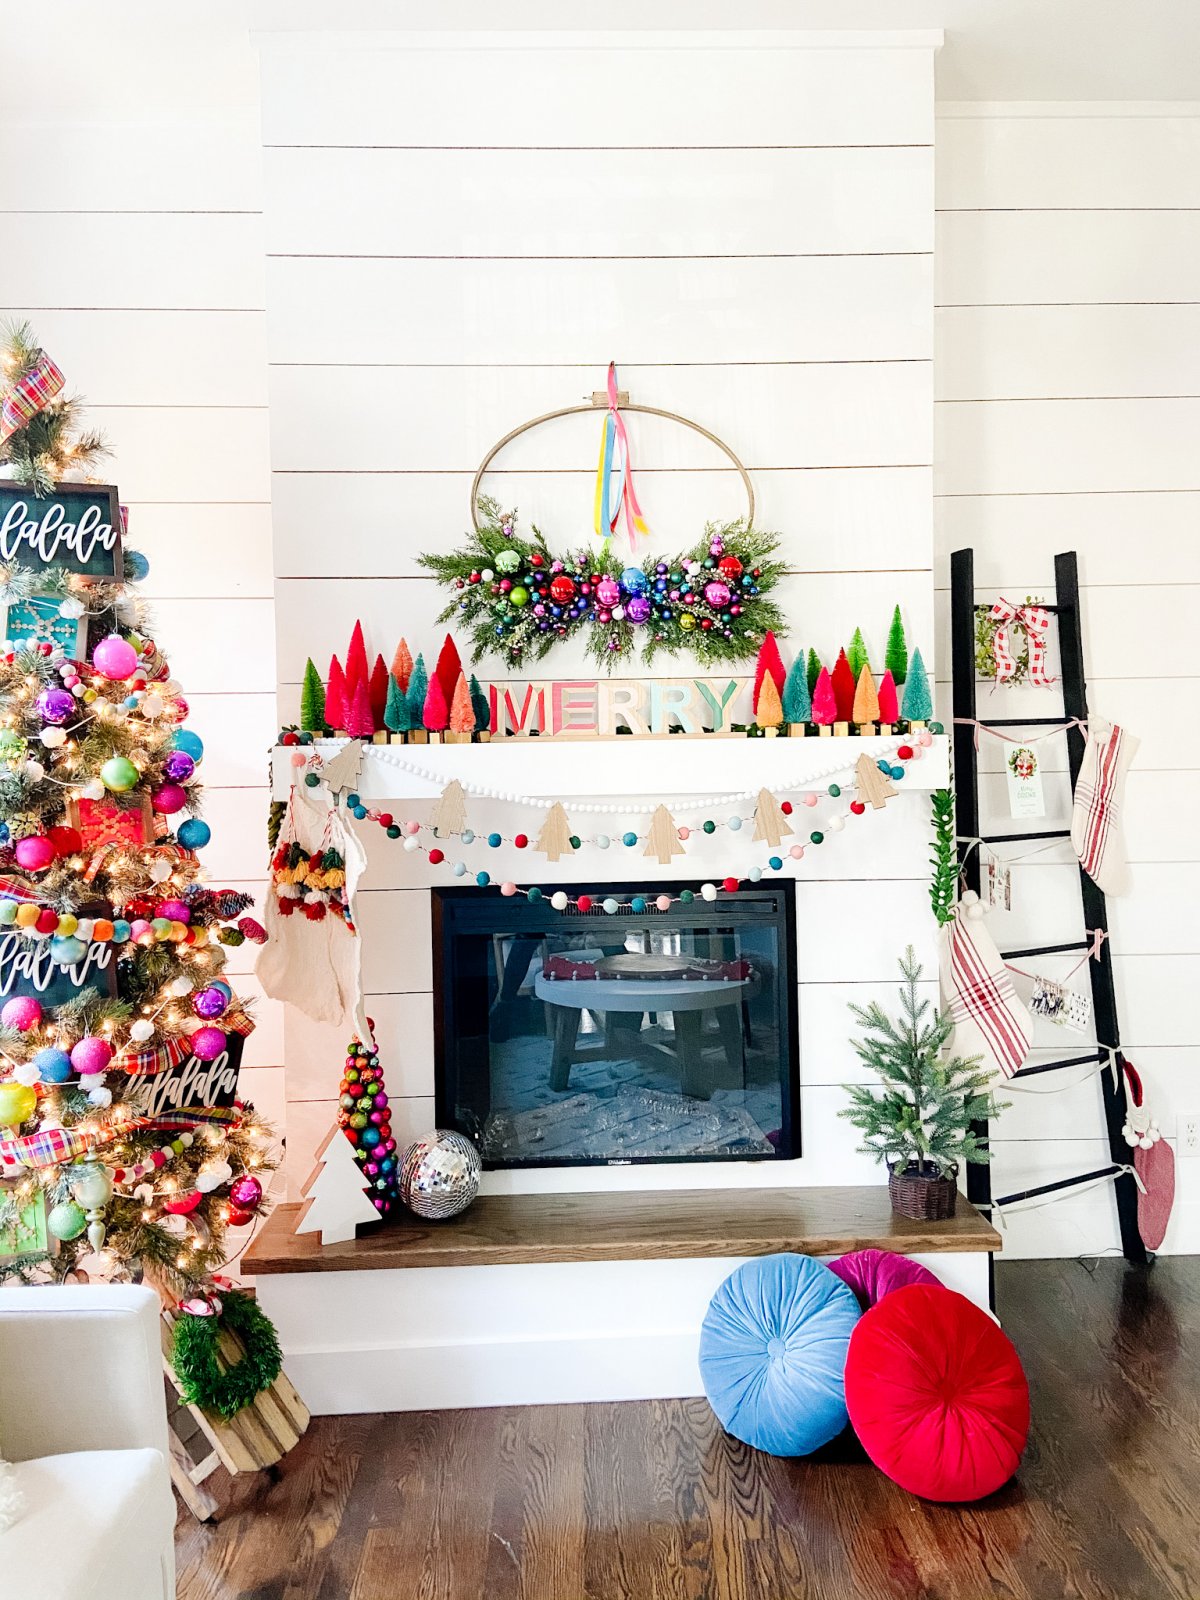 Colorful Holiday Tree and Mantel